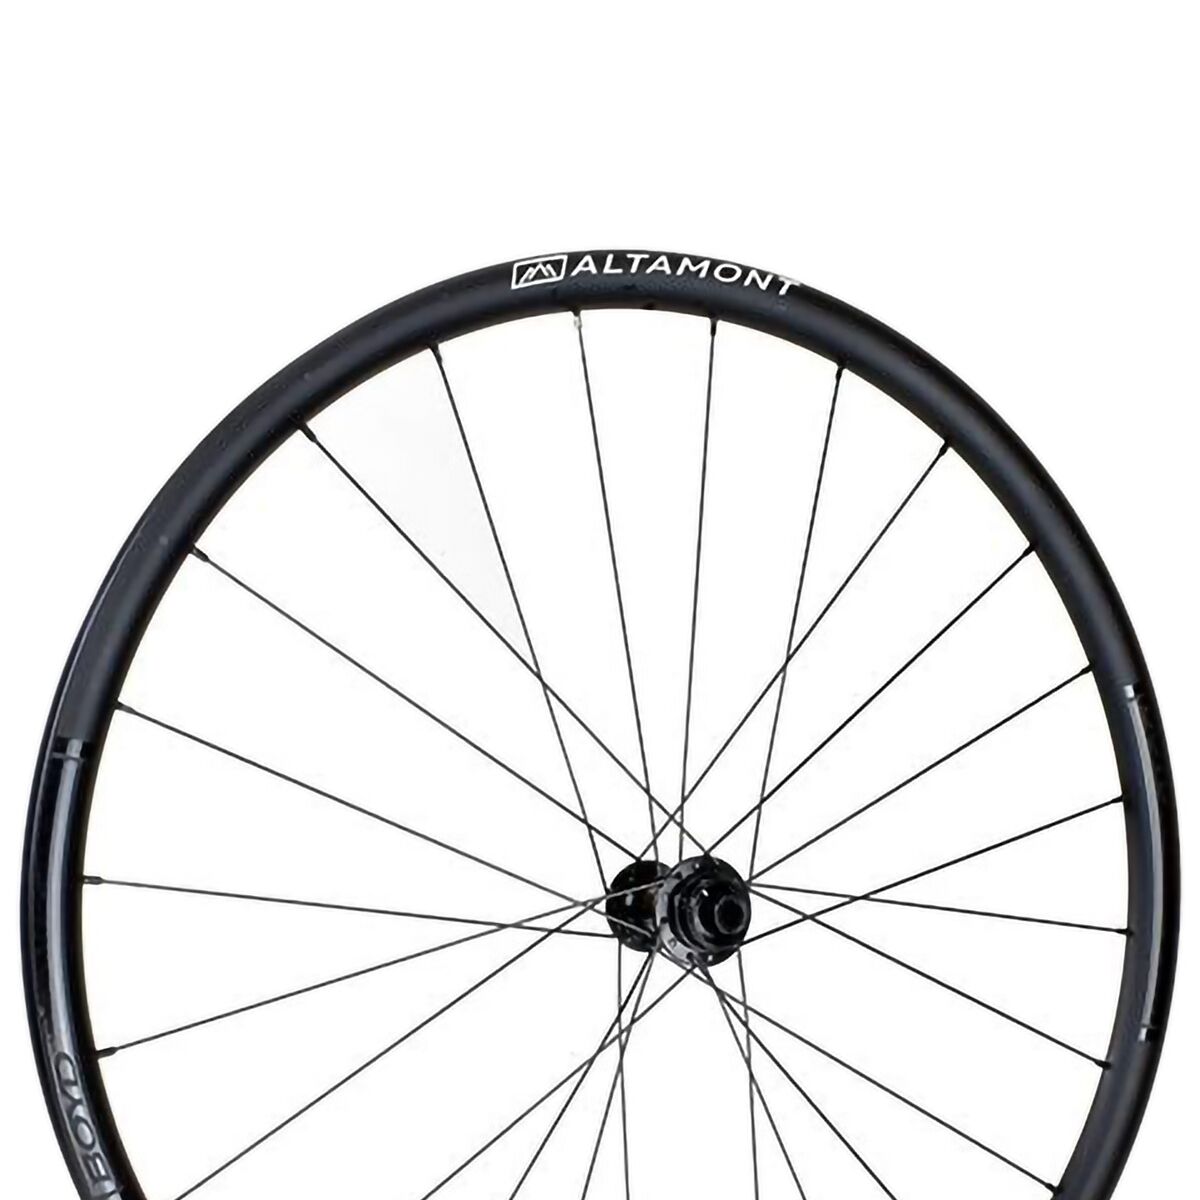 Boyd Cycling Altamont Disc Wheel - Tubeless